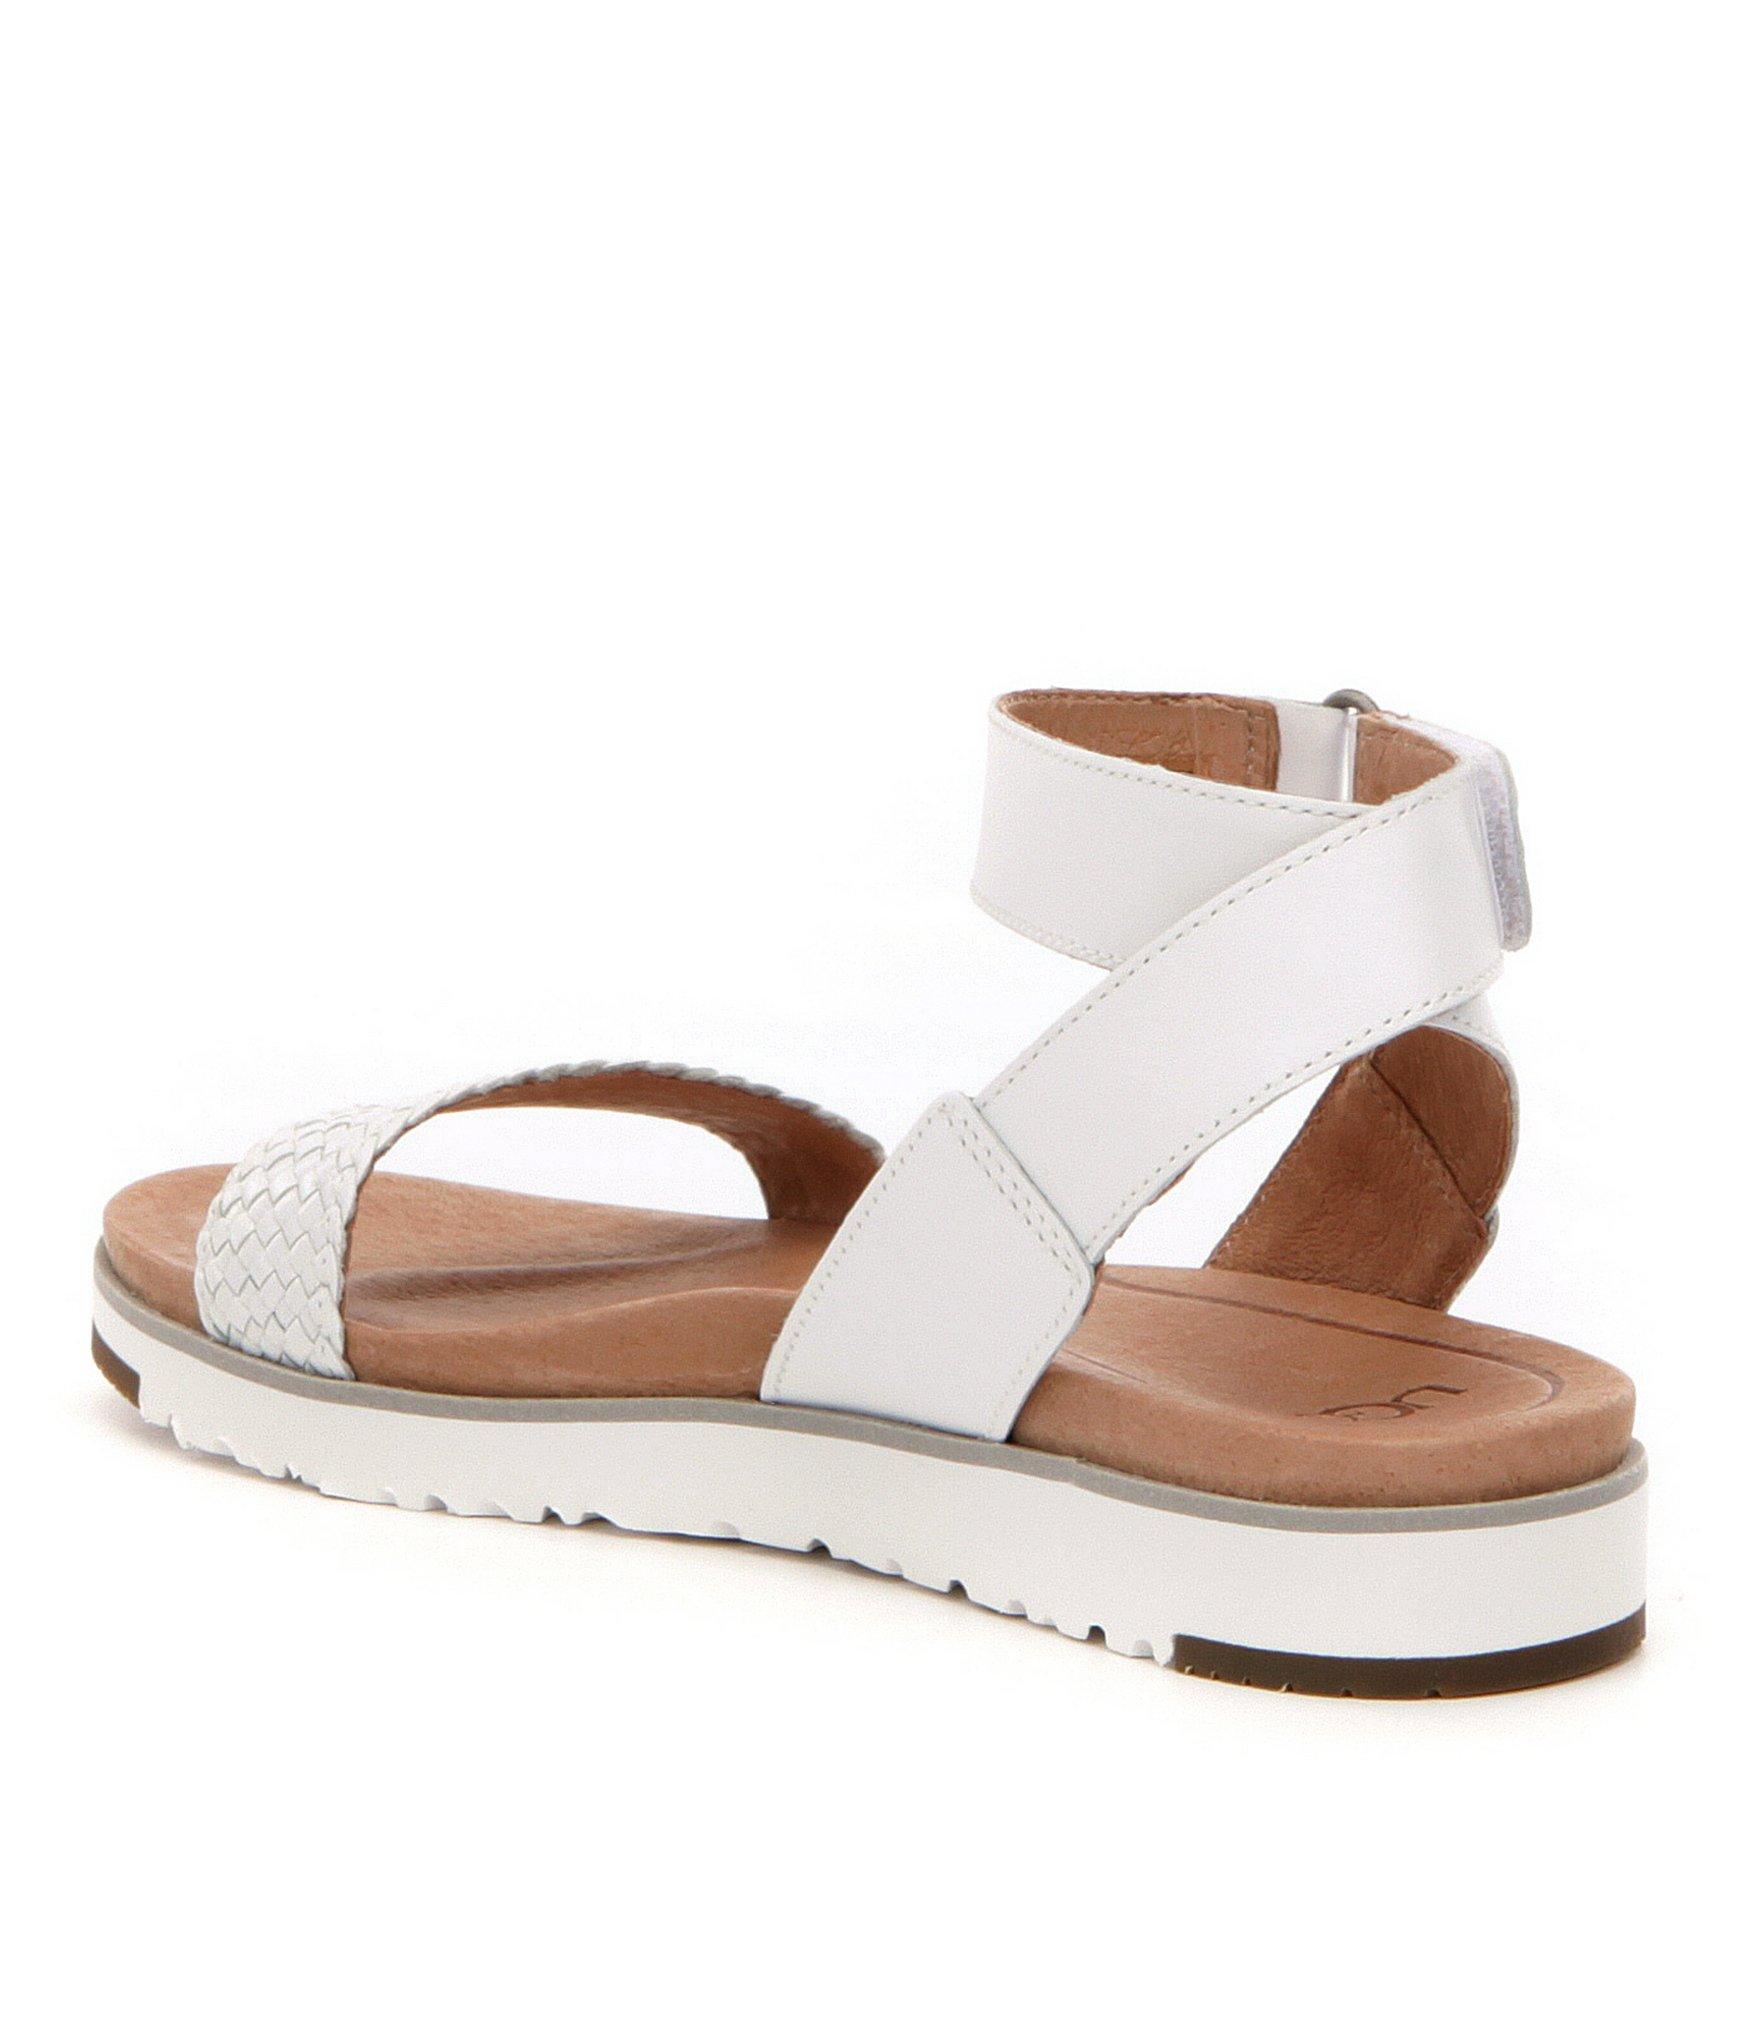 Lyst - Ugg ® Laddie Leather Sandals in White